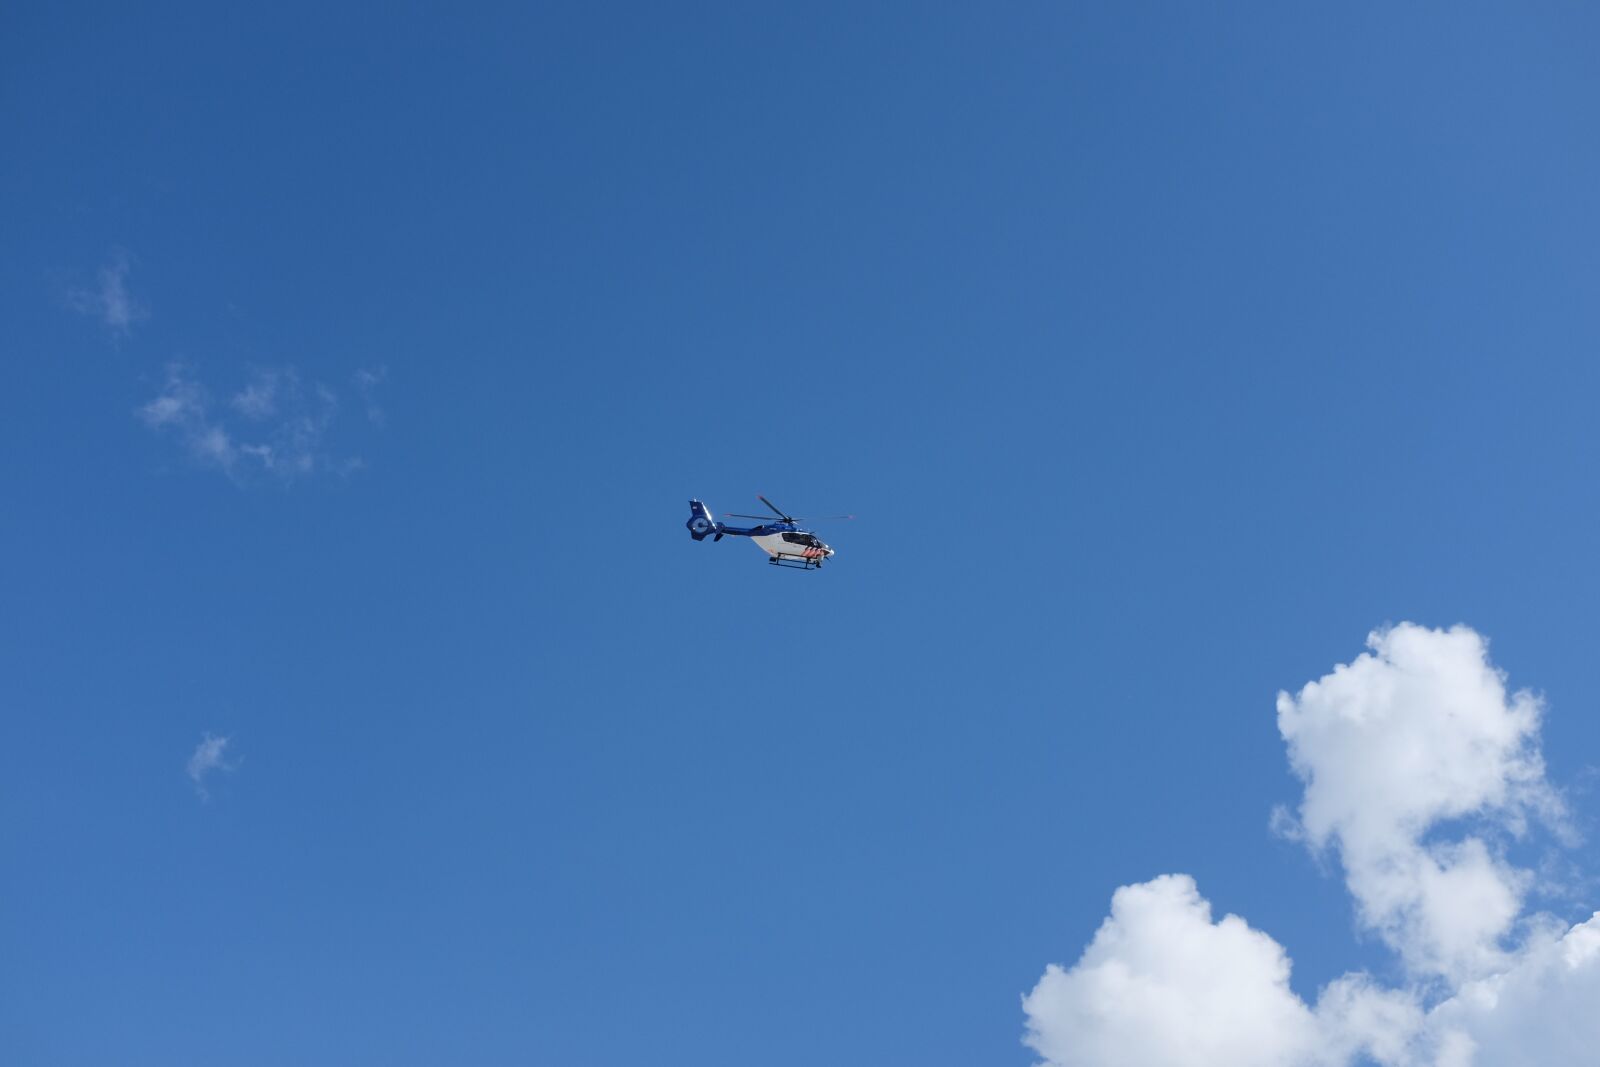 Fujifilm X100S sample photo. Sky, clouds, helicopter photography